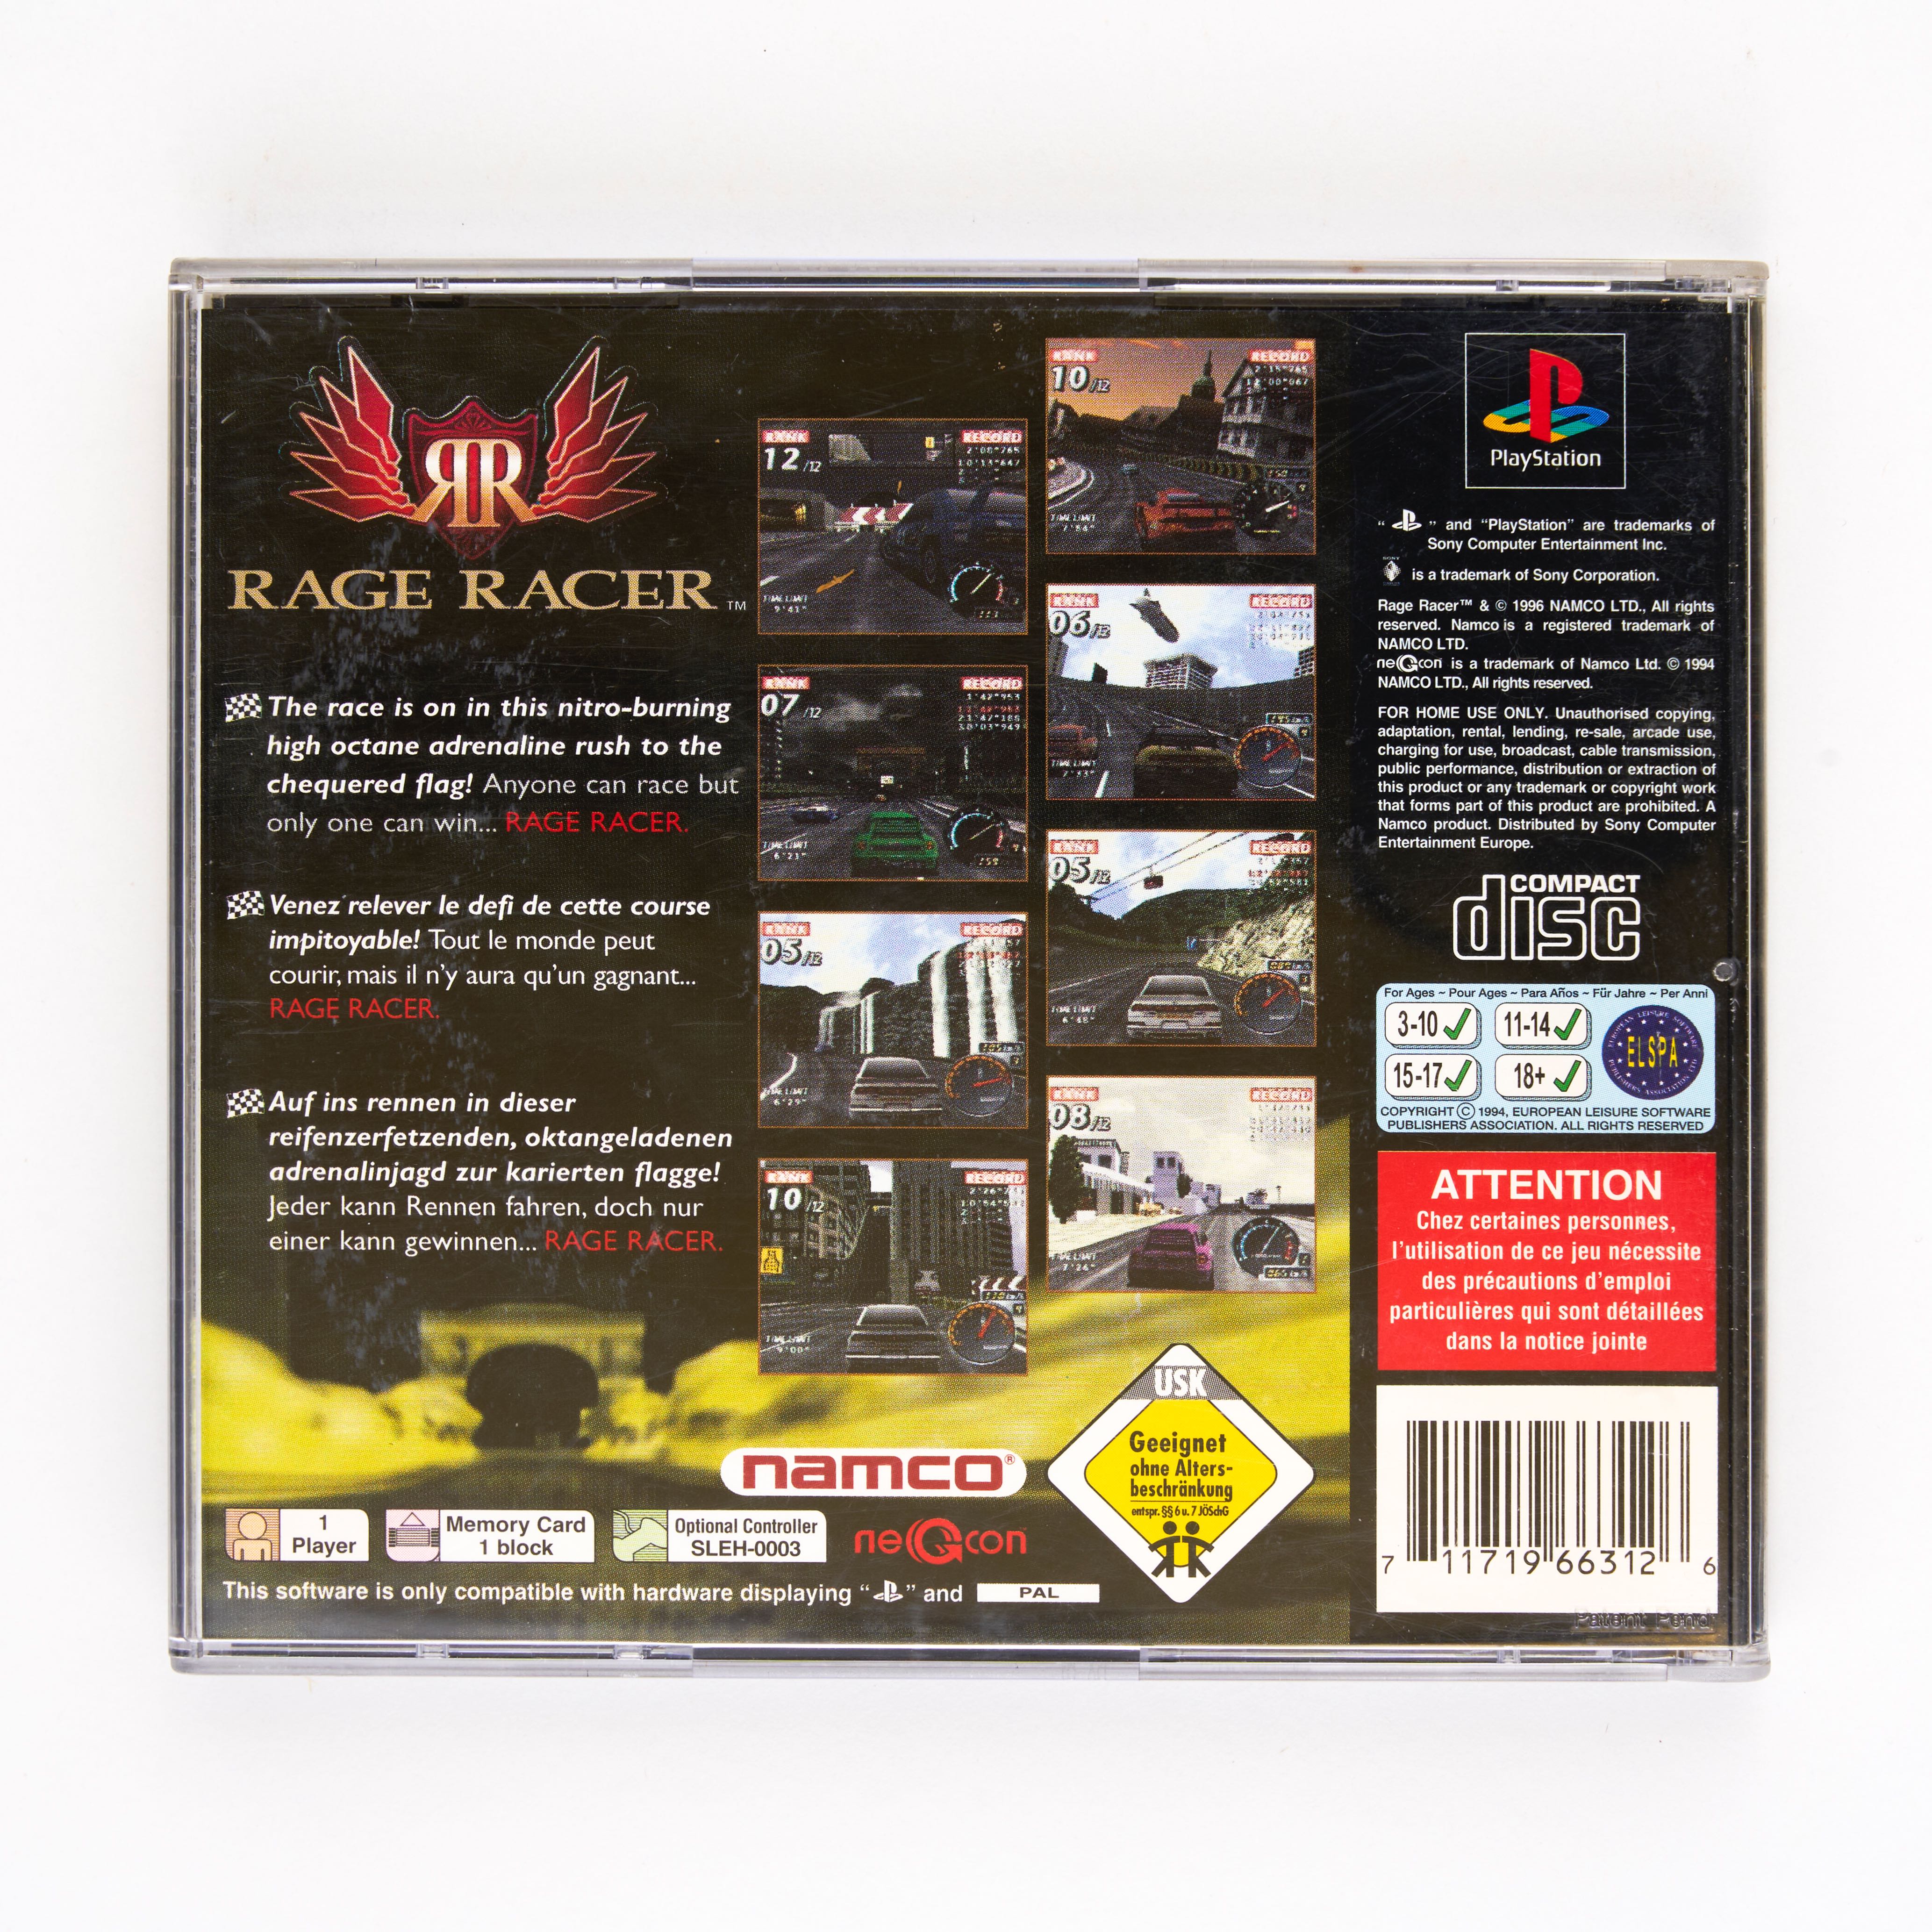 Sony - Ridge Racer PAL - Playstation - Complete In Box - Image 2 of 2